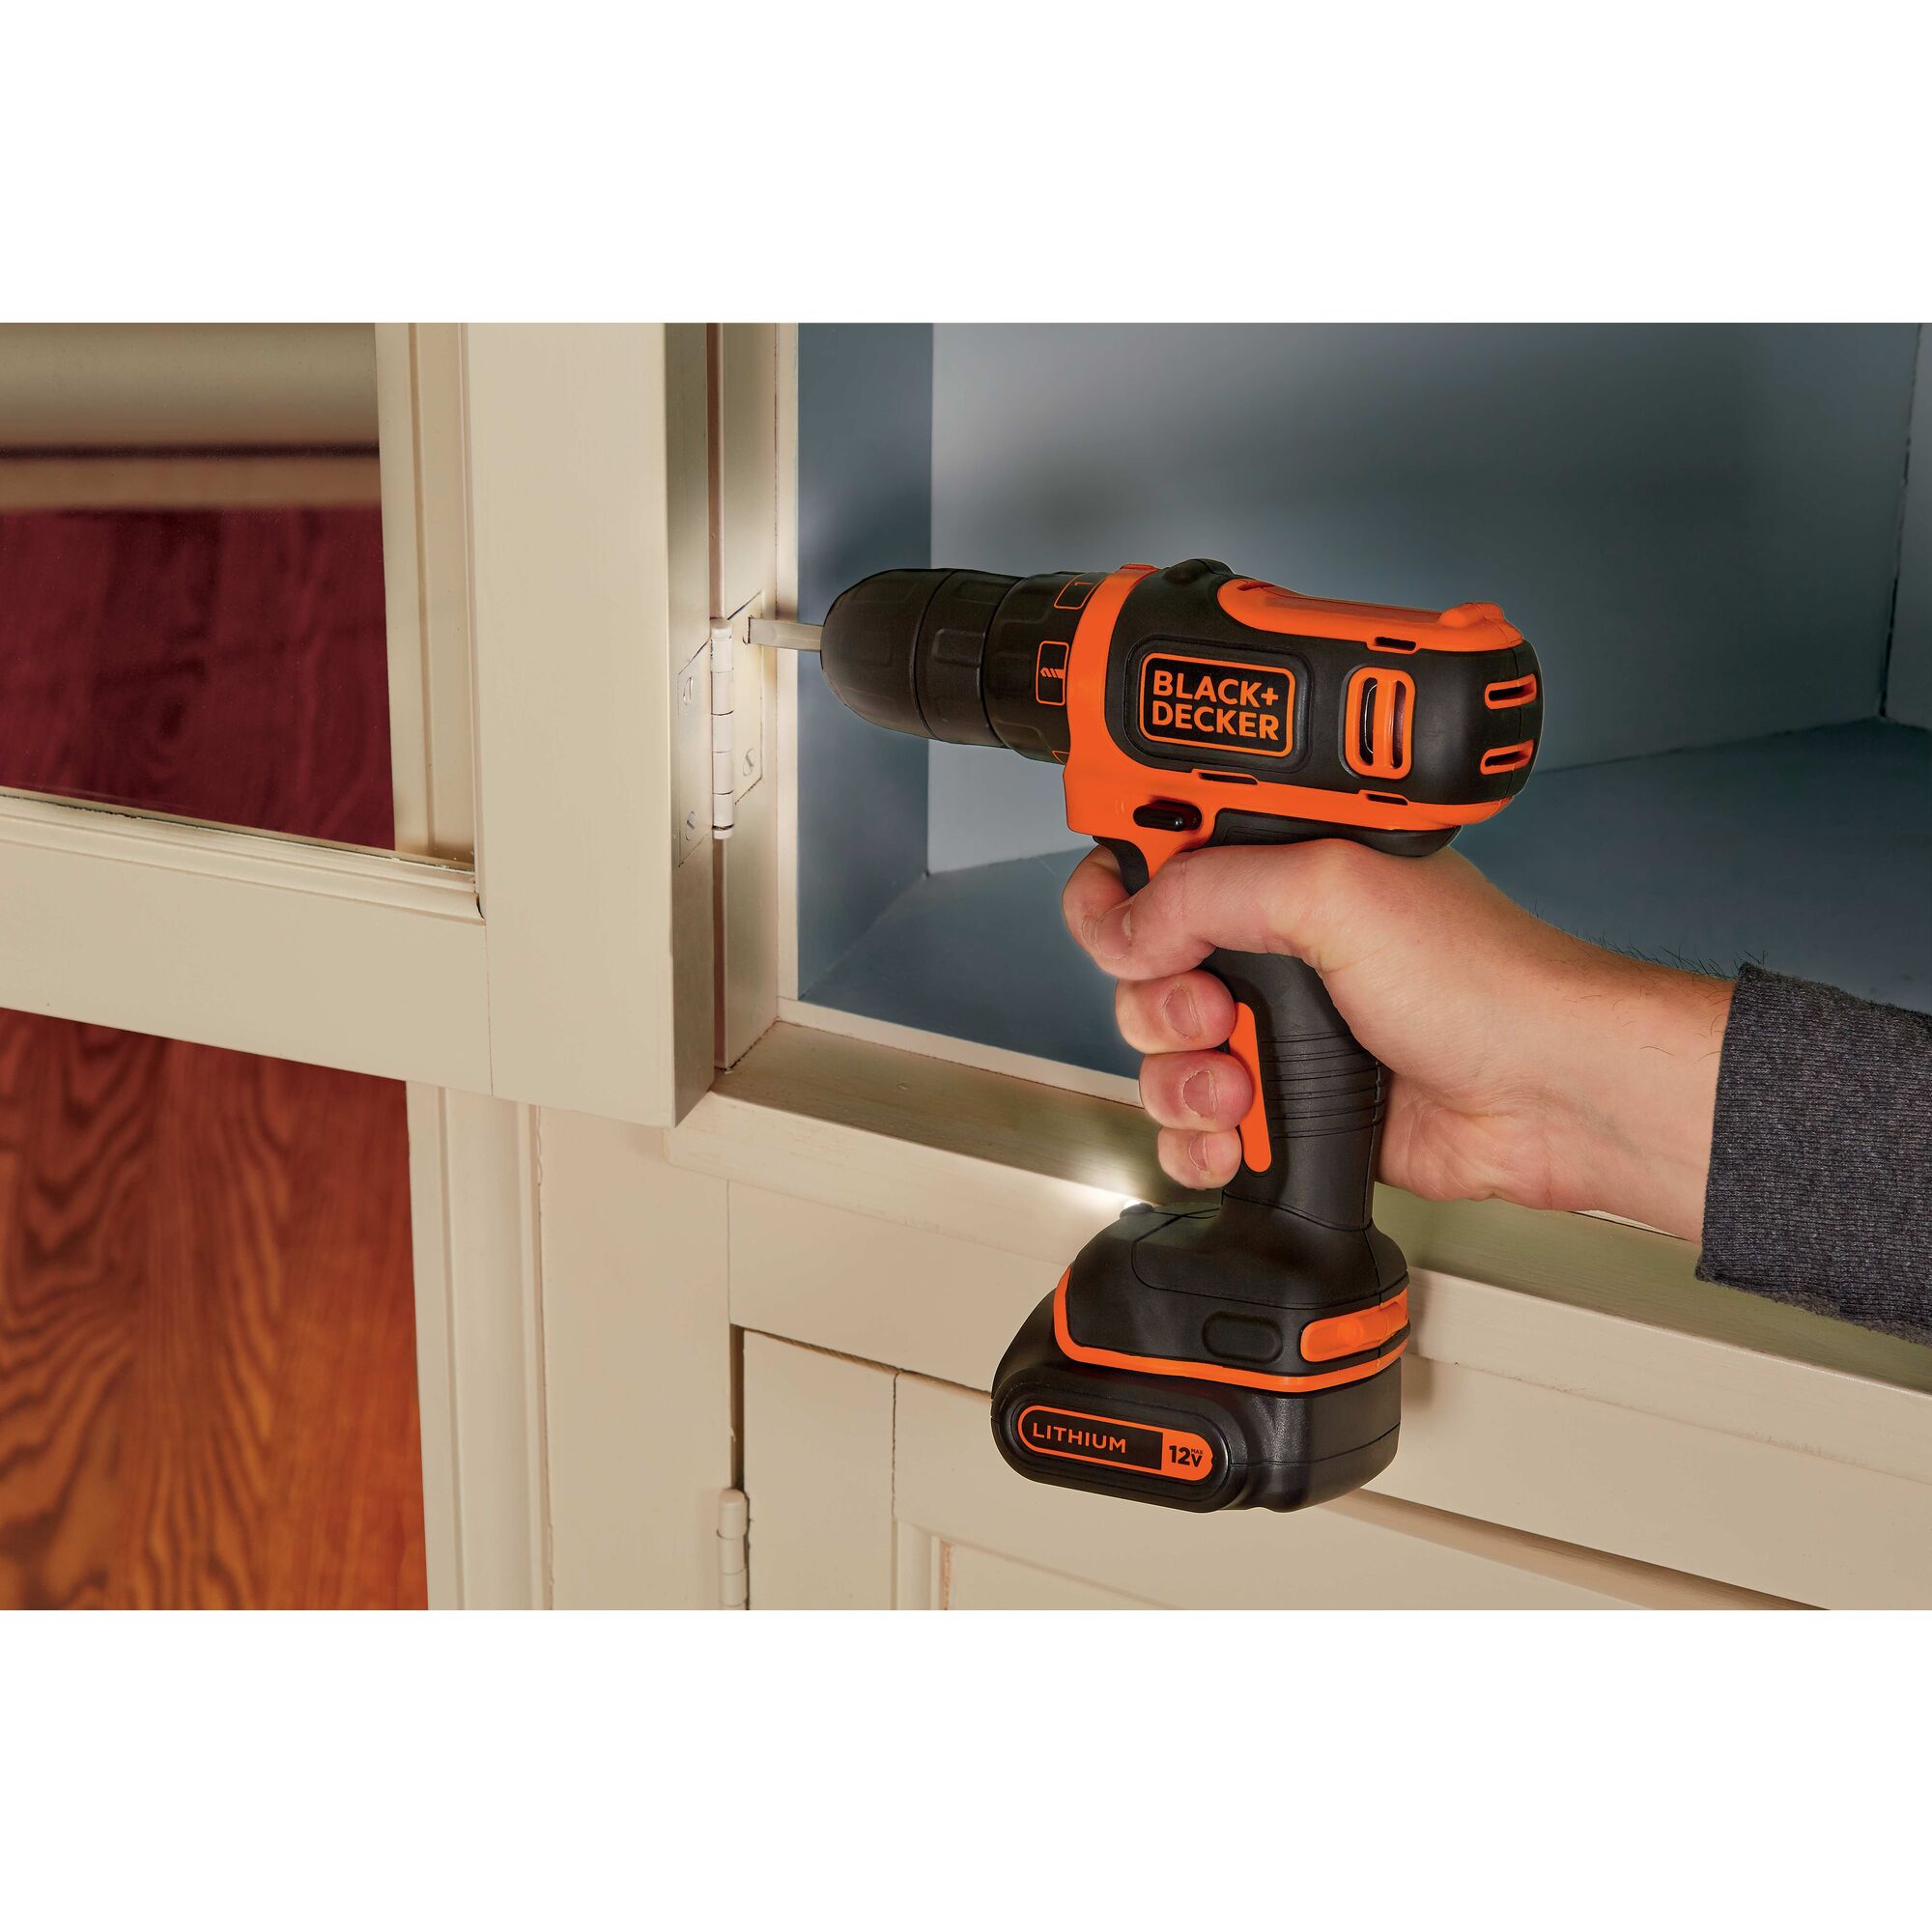 Cordless Lithium Drill Driver being used to tighten screws of cabinet door.